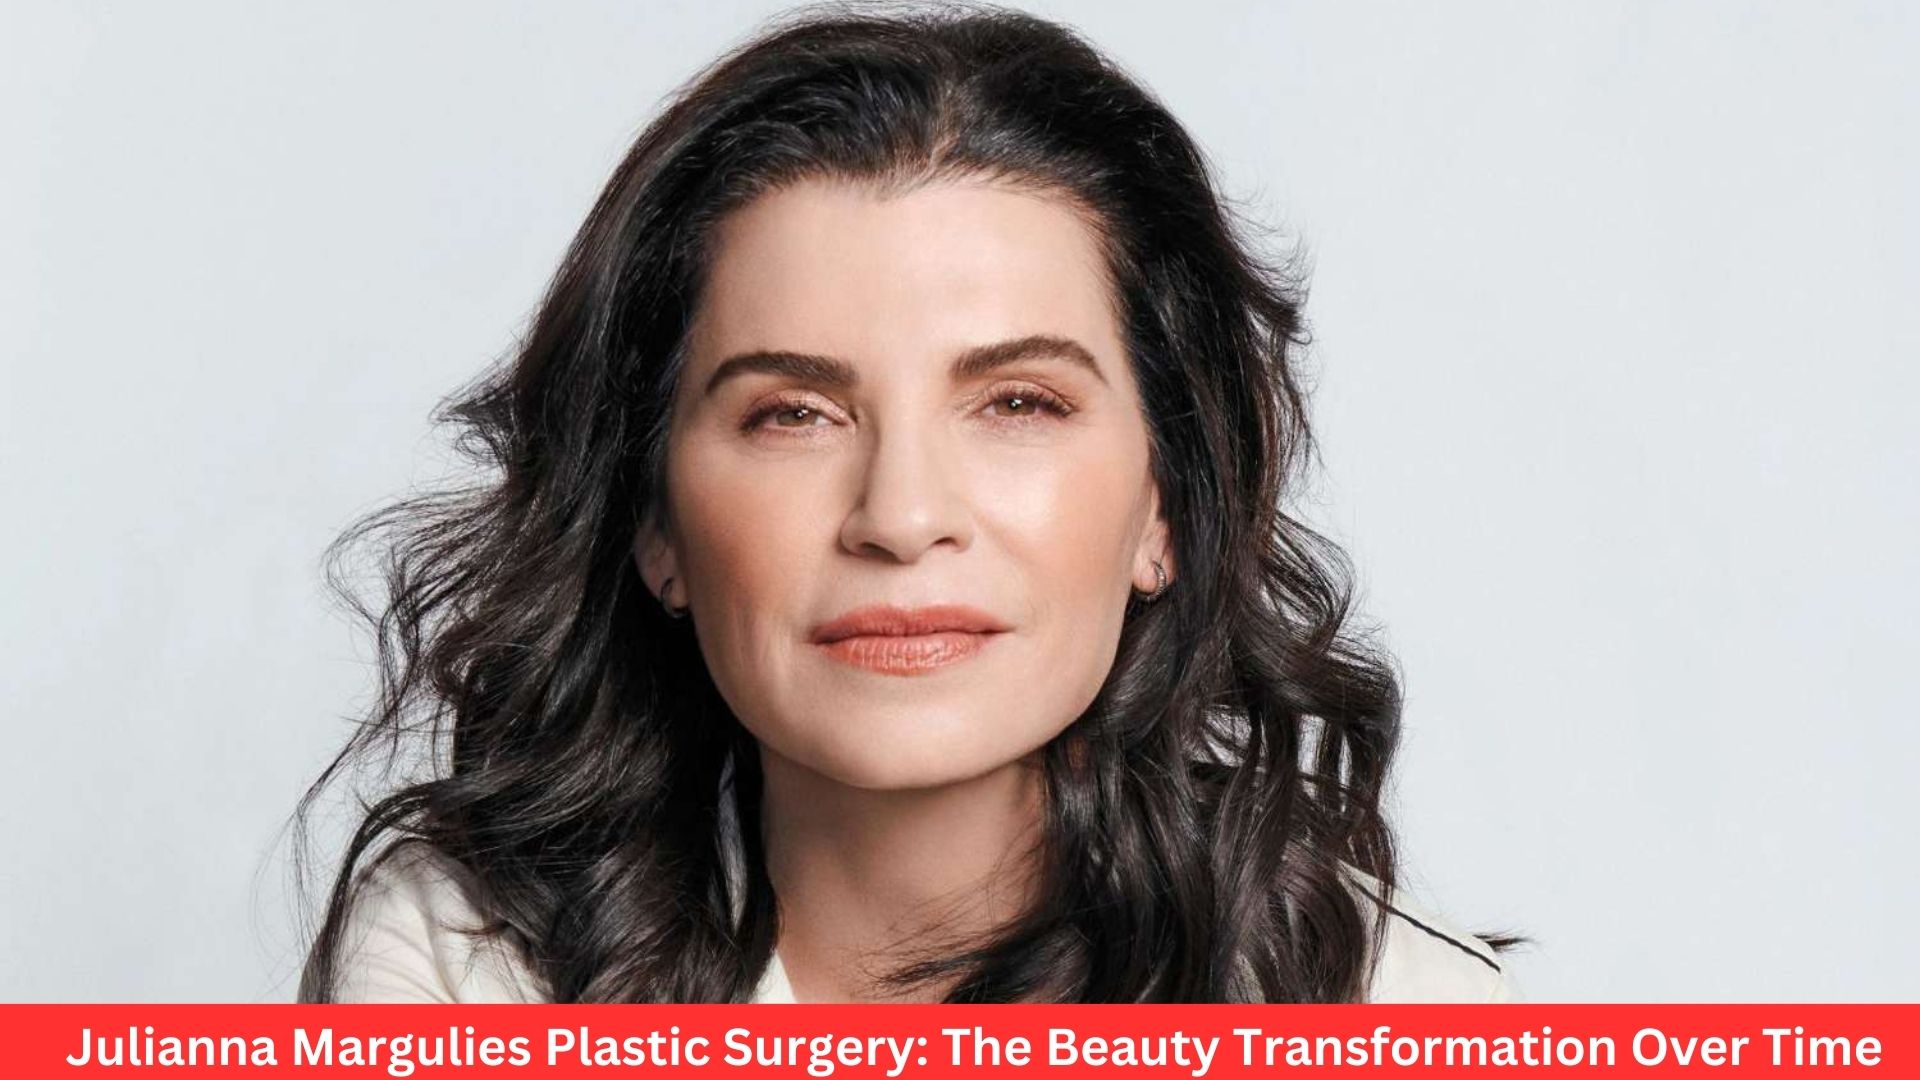 Julianna Margulies Plastic Surgery: The Beauty Transformation Over Time